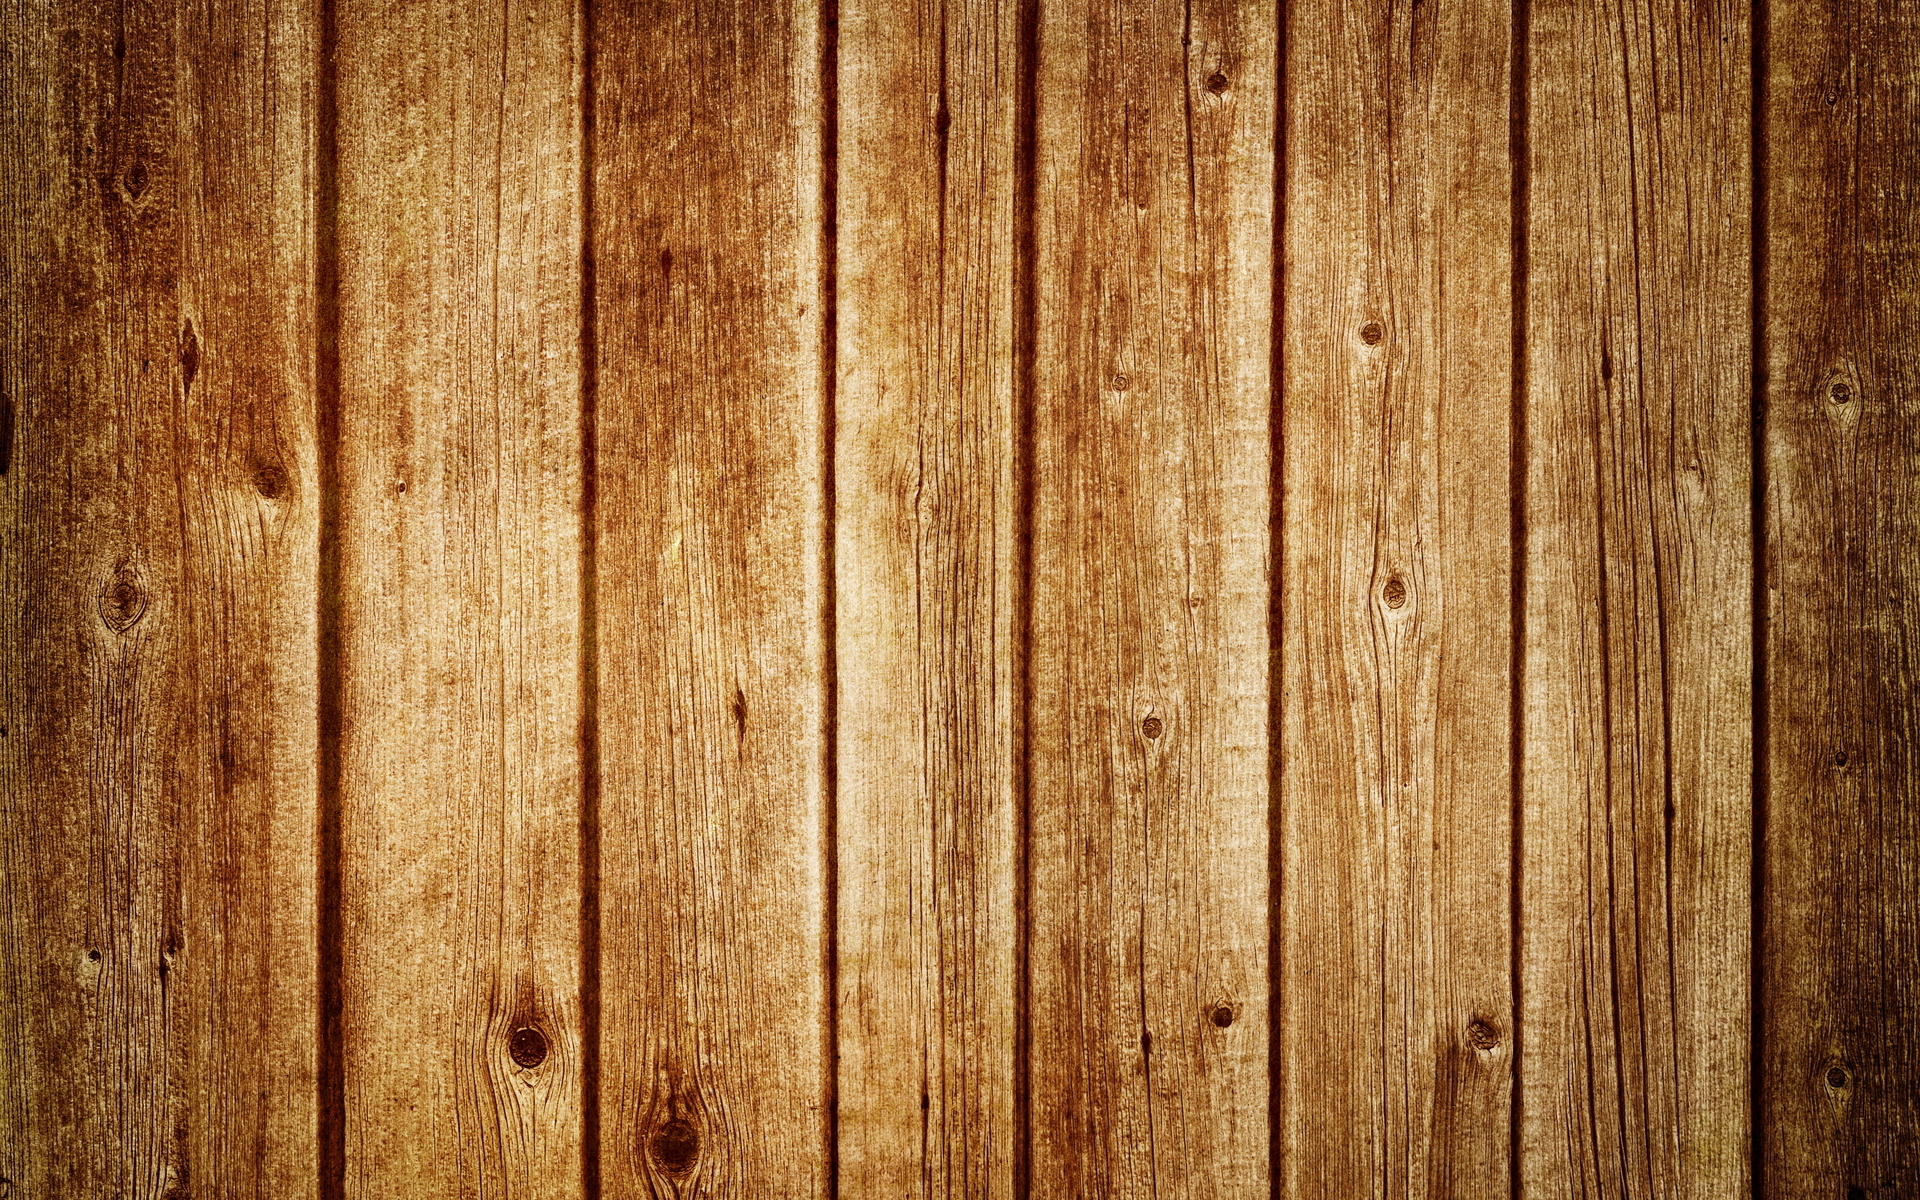 Wood Background Photos Download The BEST Free Wood Background Stock Photos   HD Images